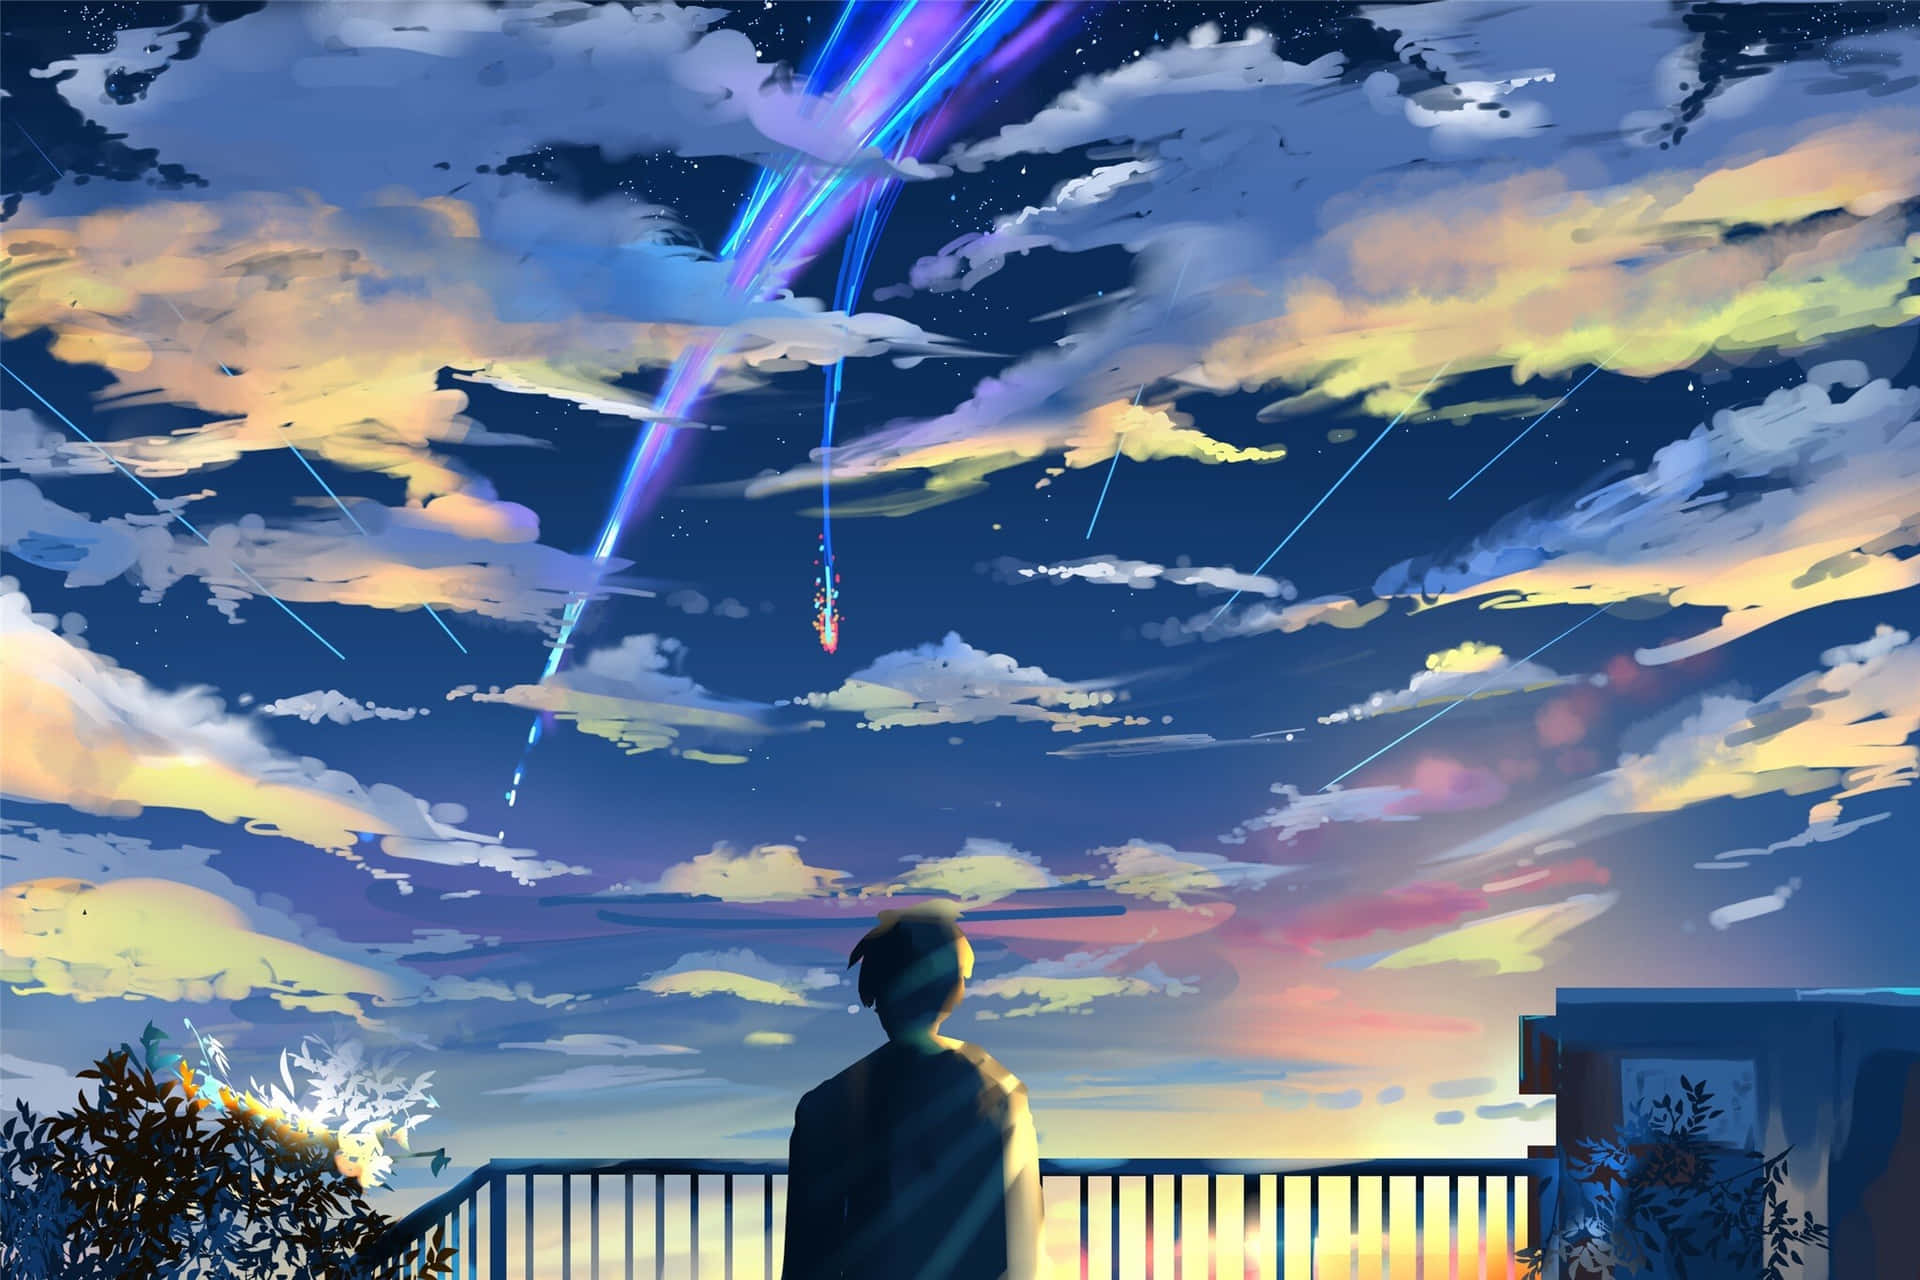 "Kimi No Na Wa - A Tale of Two Connected Souls"